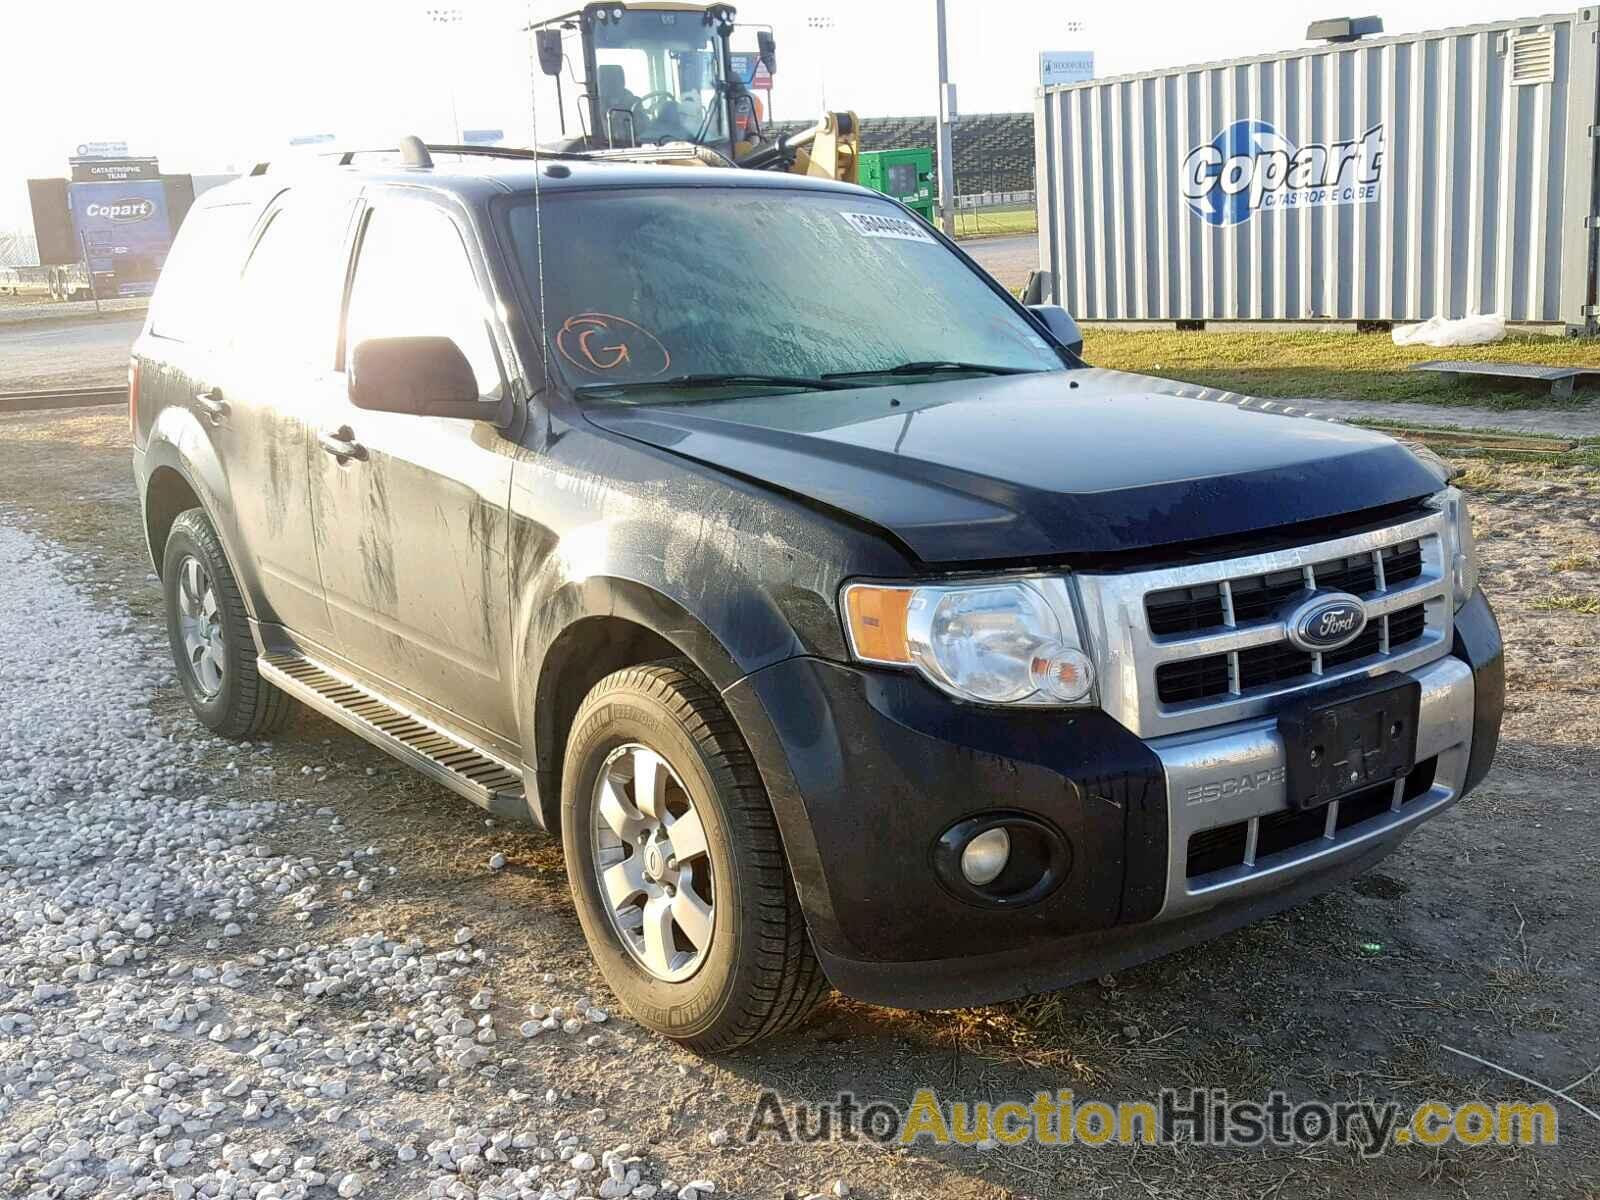 2009 FORD ESCAPE LIMITED, 1FMCU04G89KD13528